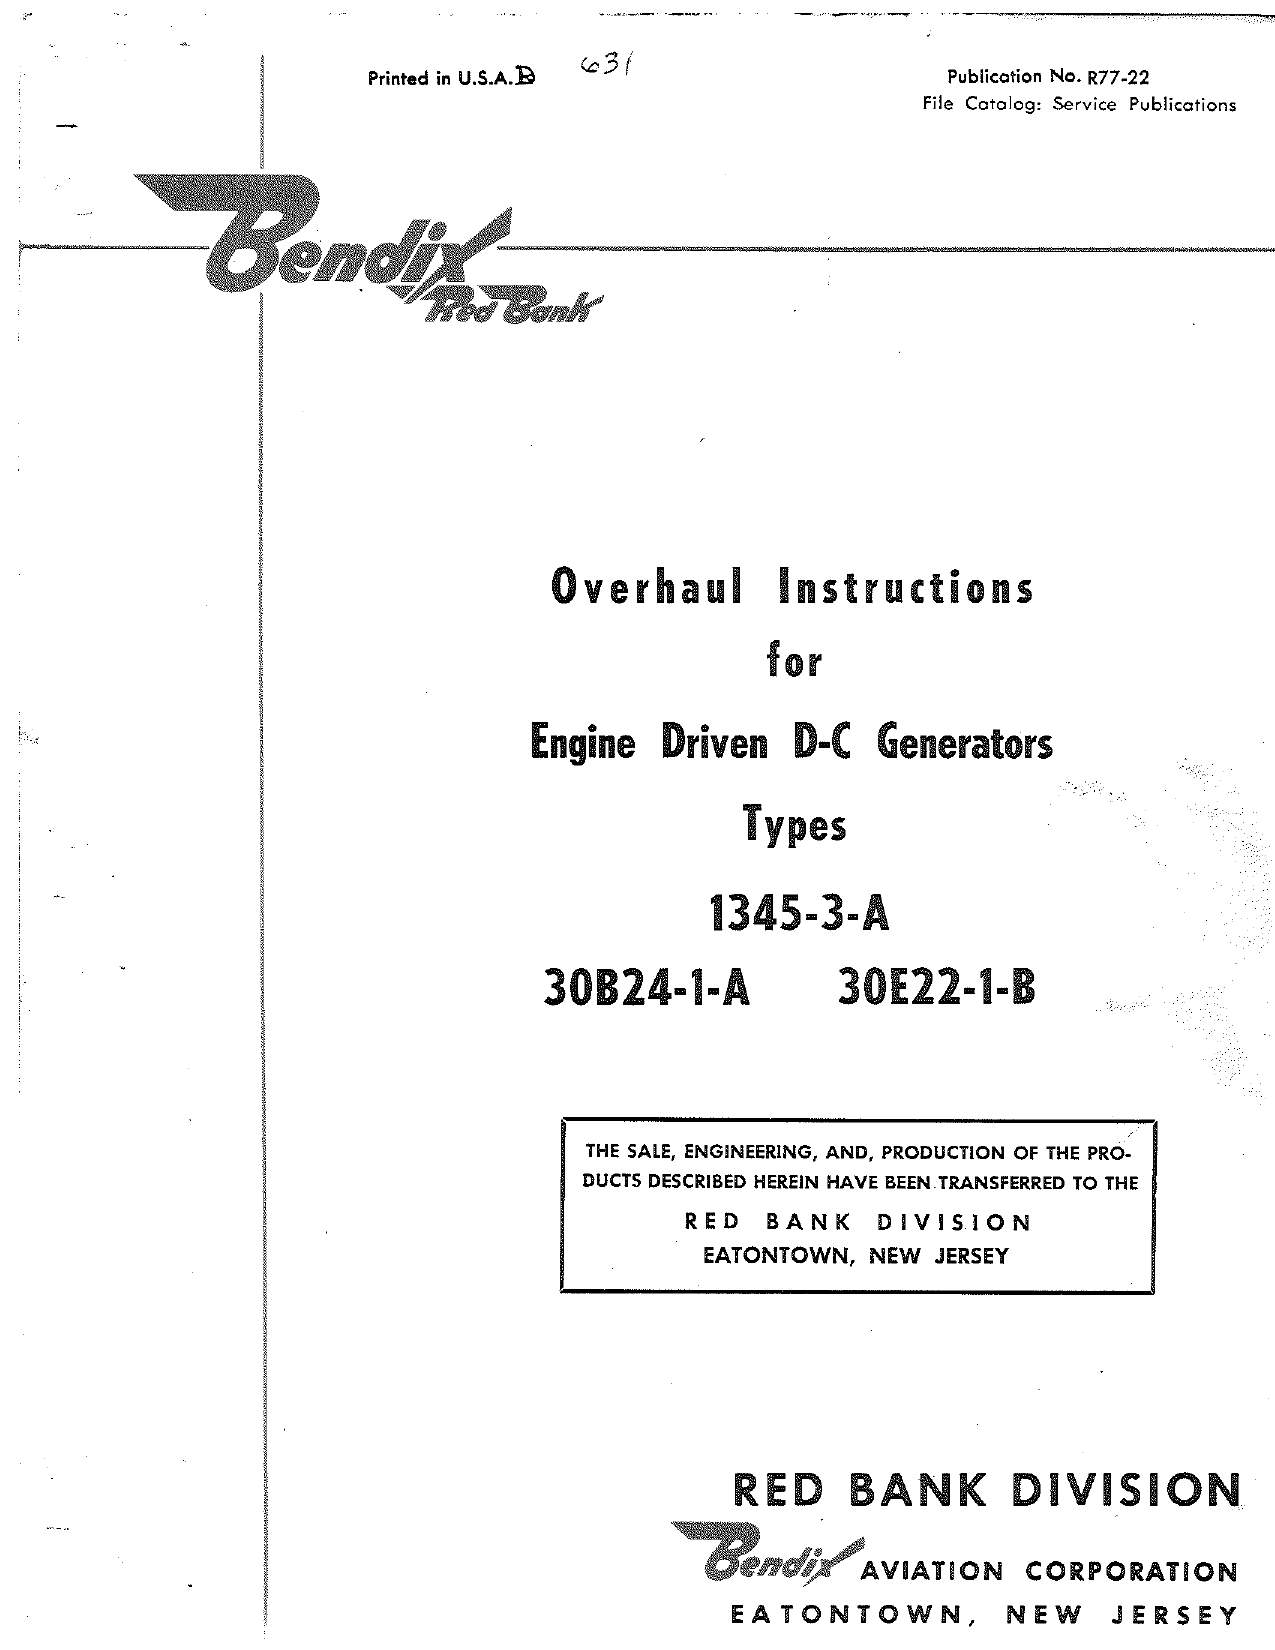 Sample page 1 from AirCorps Library document: Overhaul Instructions for Engine Driven DC Generator - Types 1345-3-A, 30B24-1-A, and 30E22-1-B